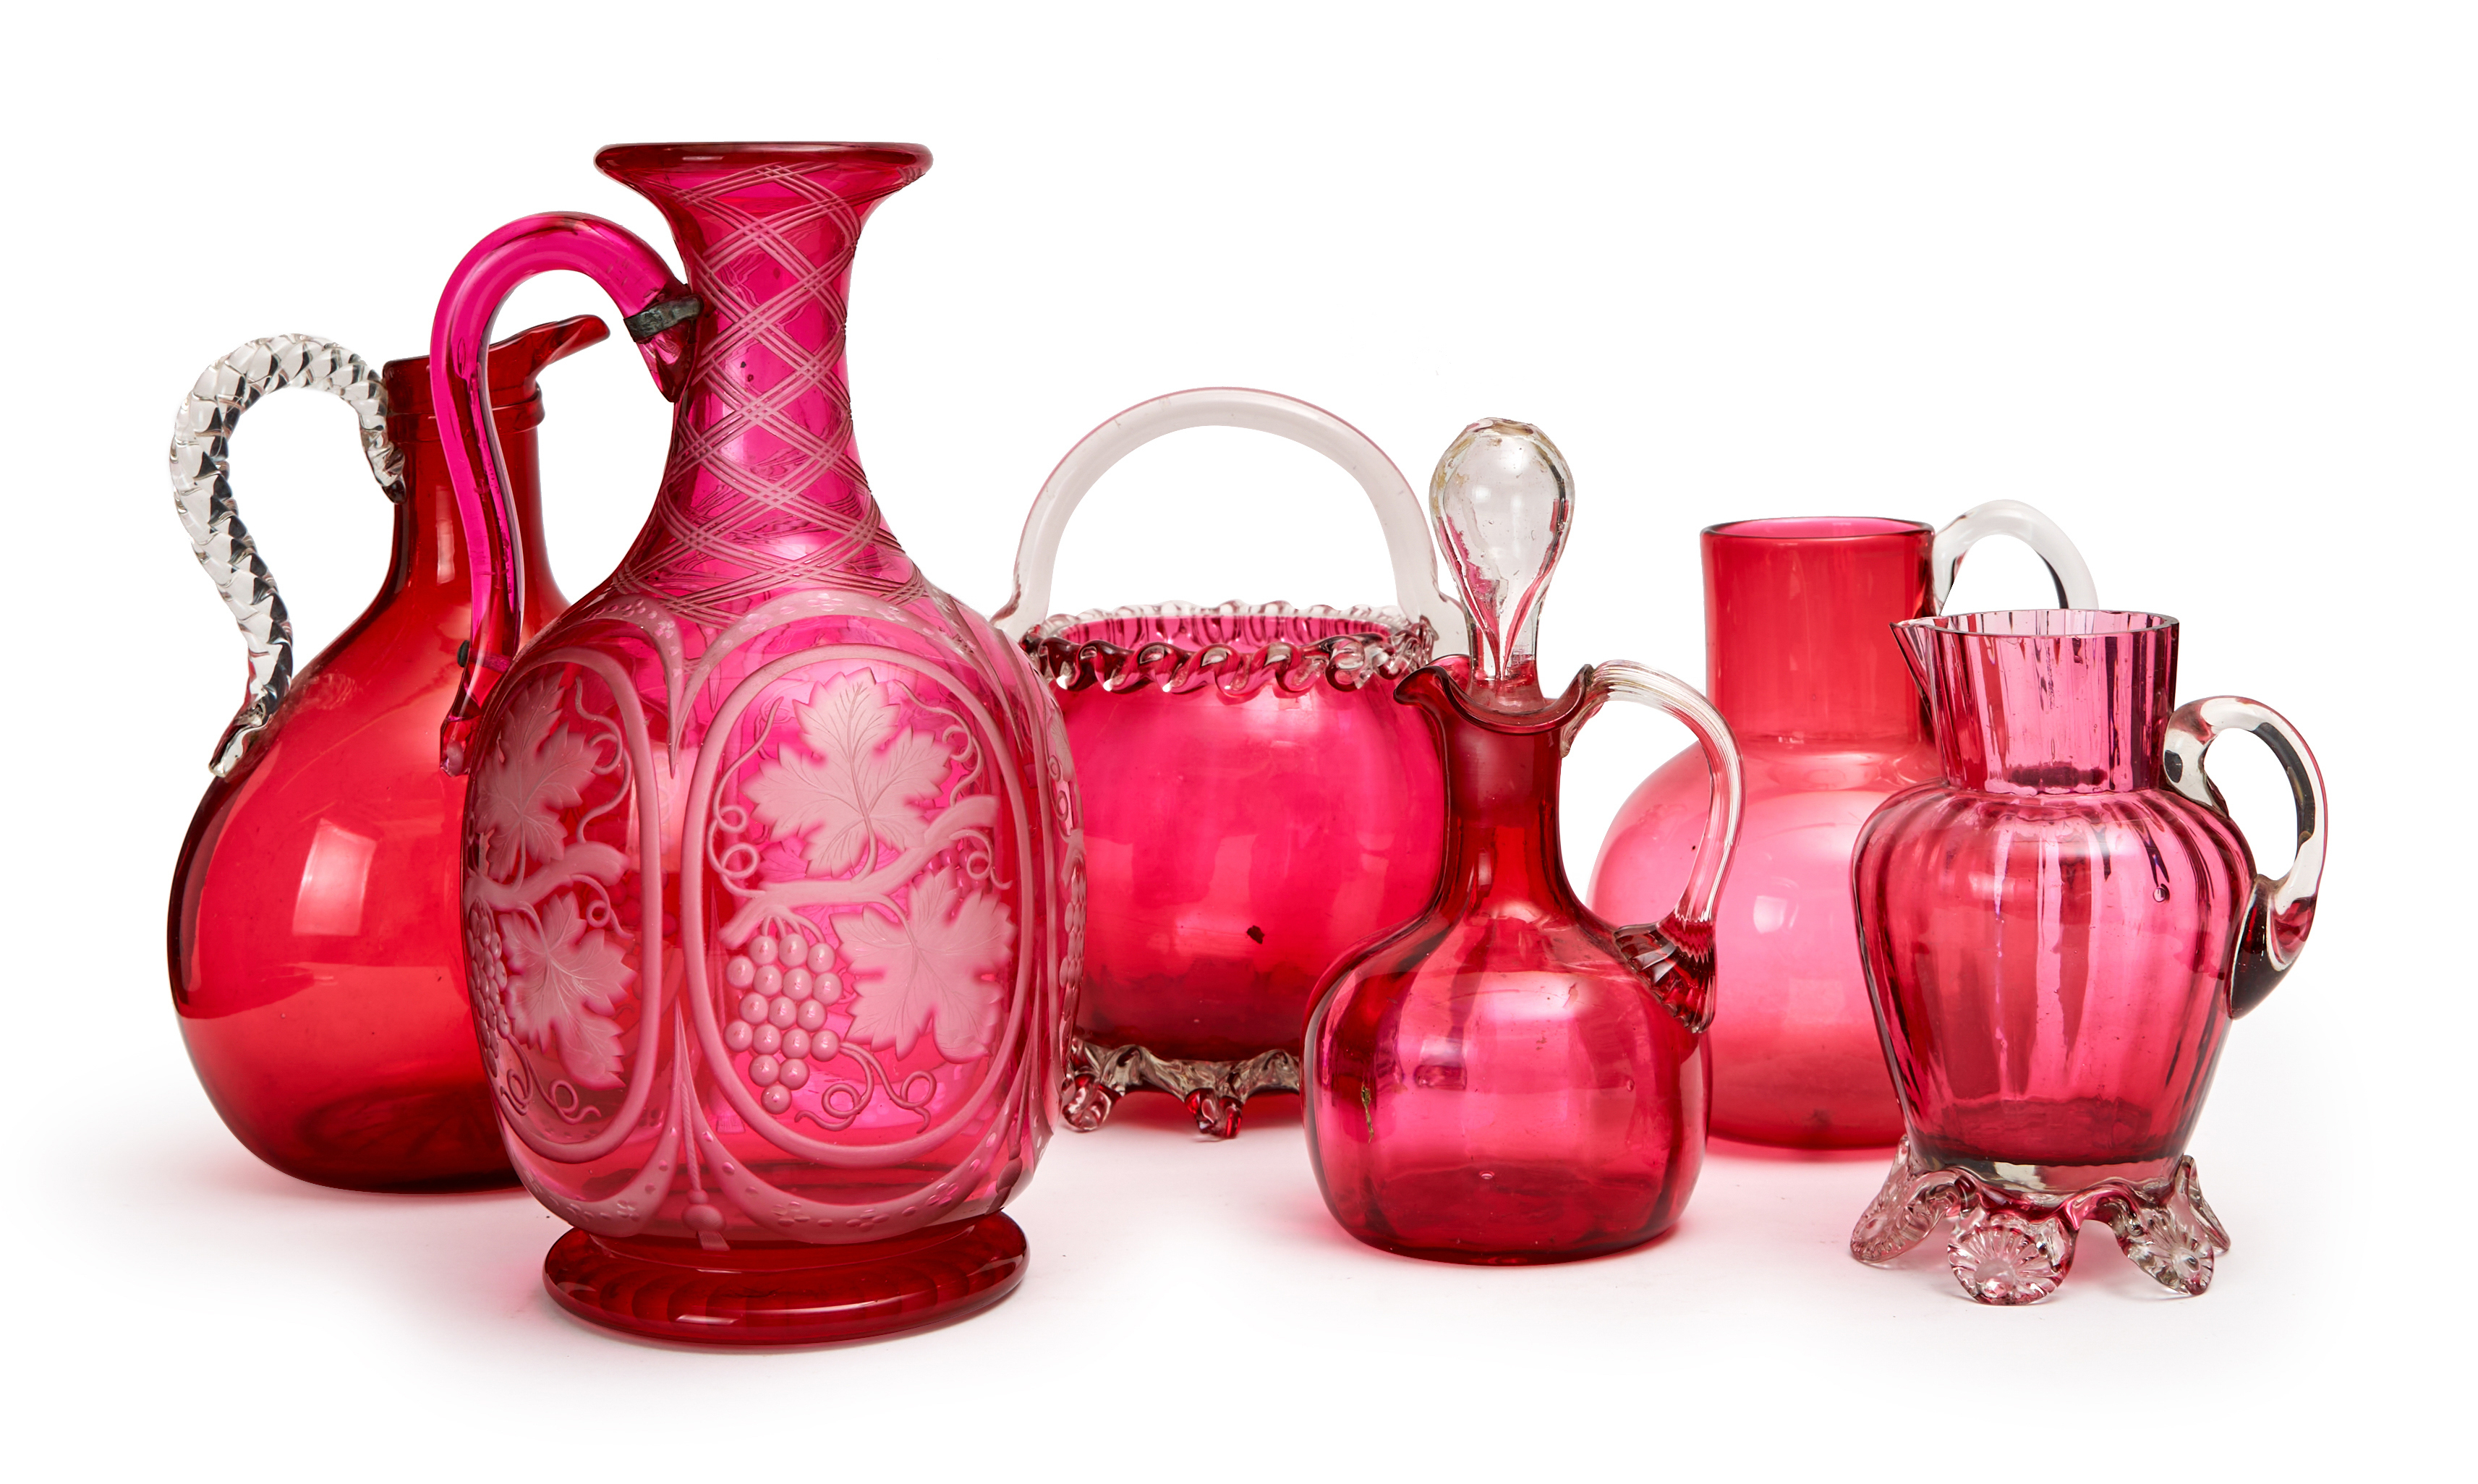 ASSORTMENT OF CRANBERRY GLASS OBJECTS, COMPROMISING EWERS & A BASKET